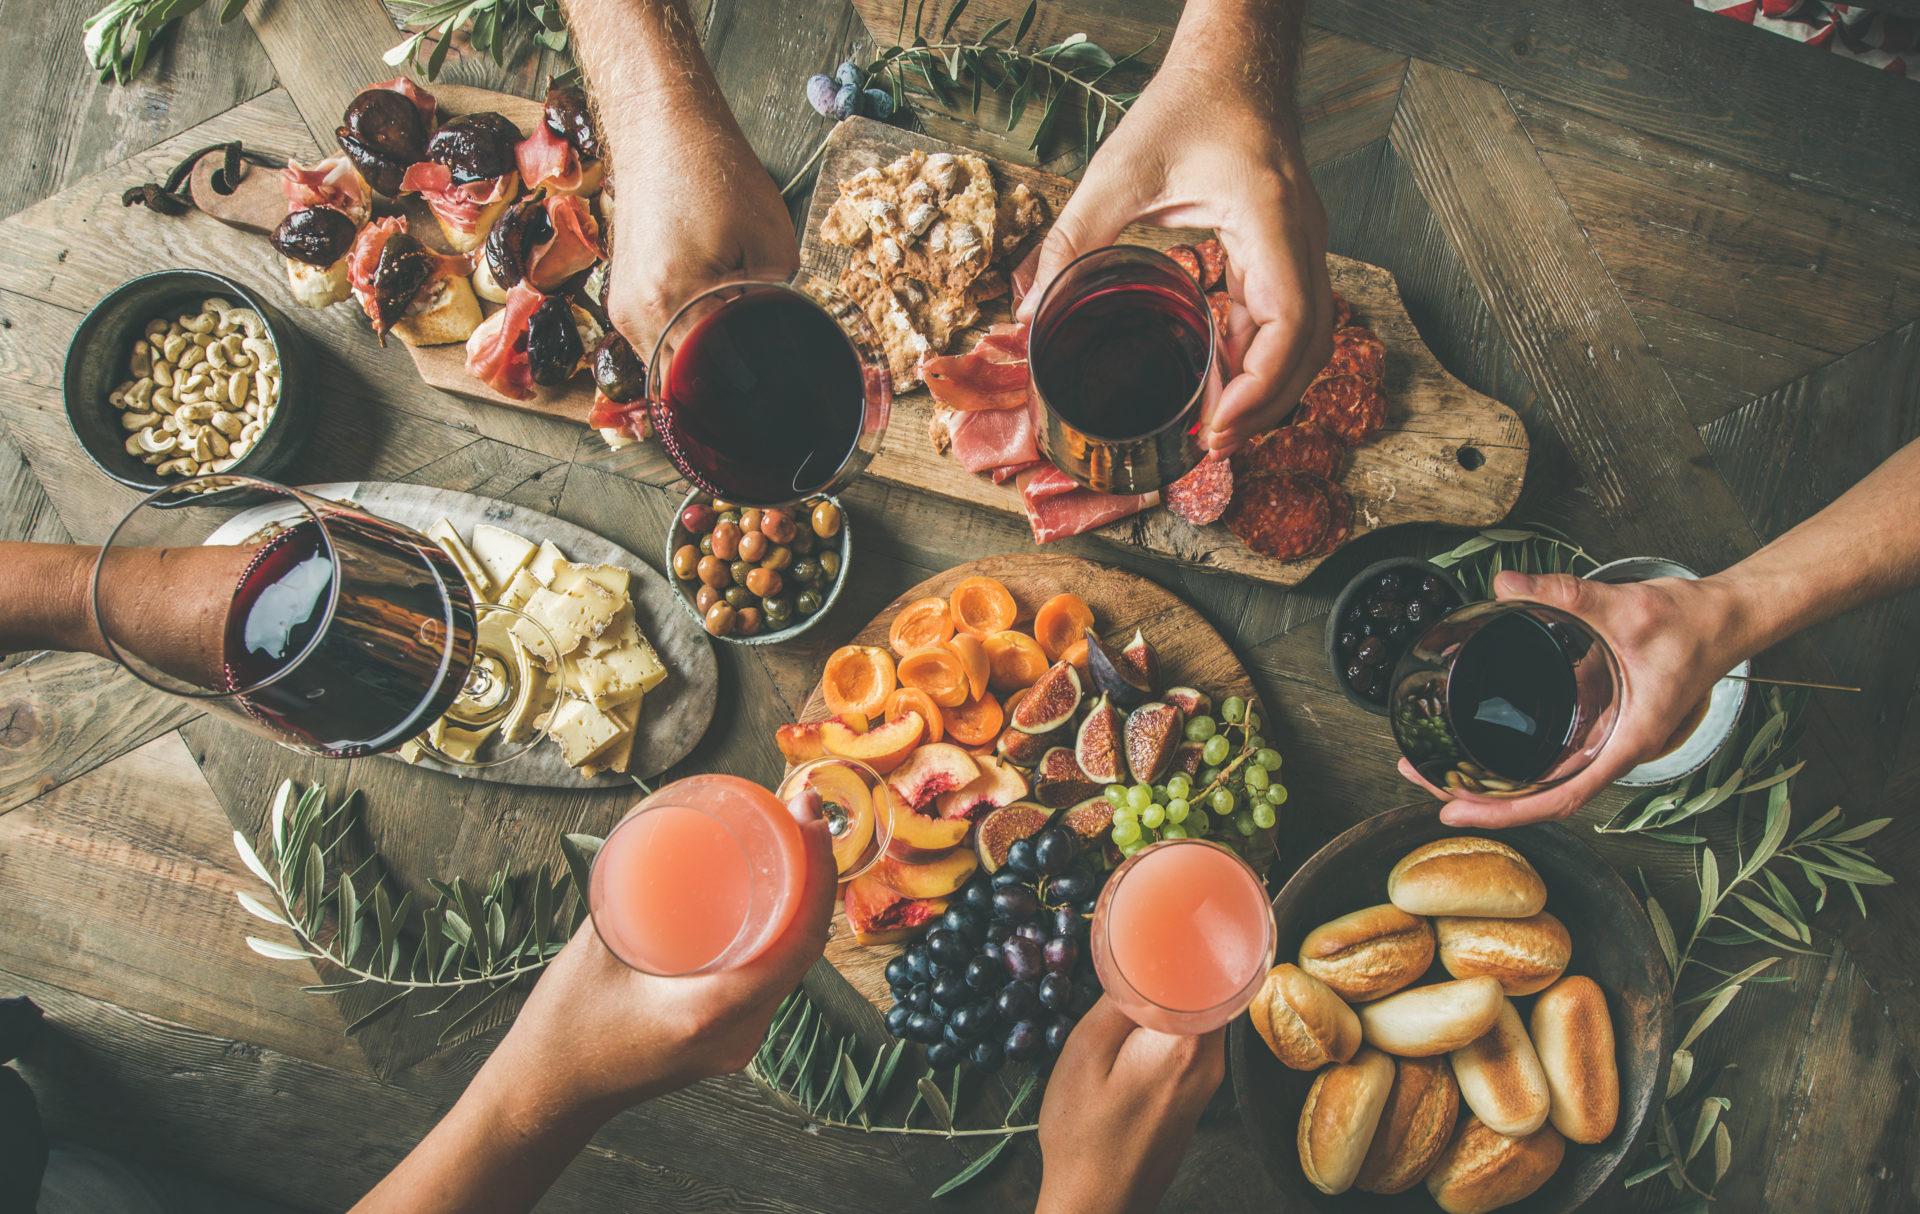 Flat-lay of friends eating and drinking together. Top view of people having party, gathering, dinner together sitting at wooden rustic table set with wine snacks and fingerfoods. Hands with glasses